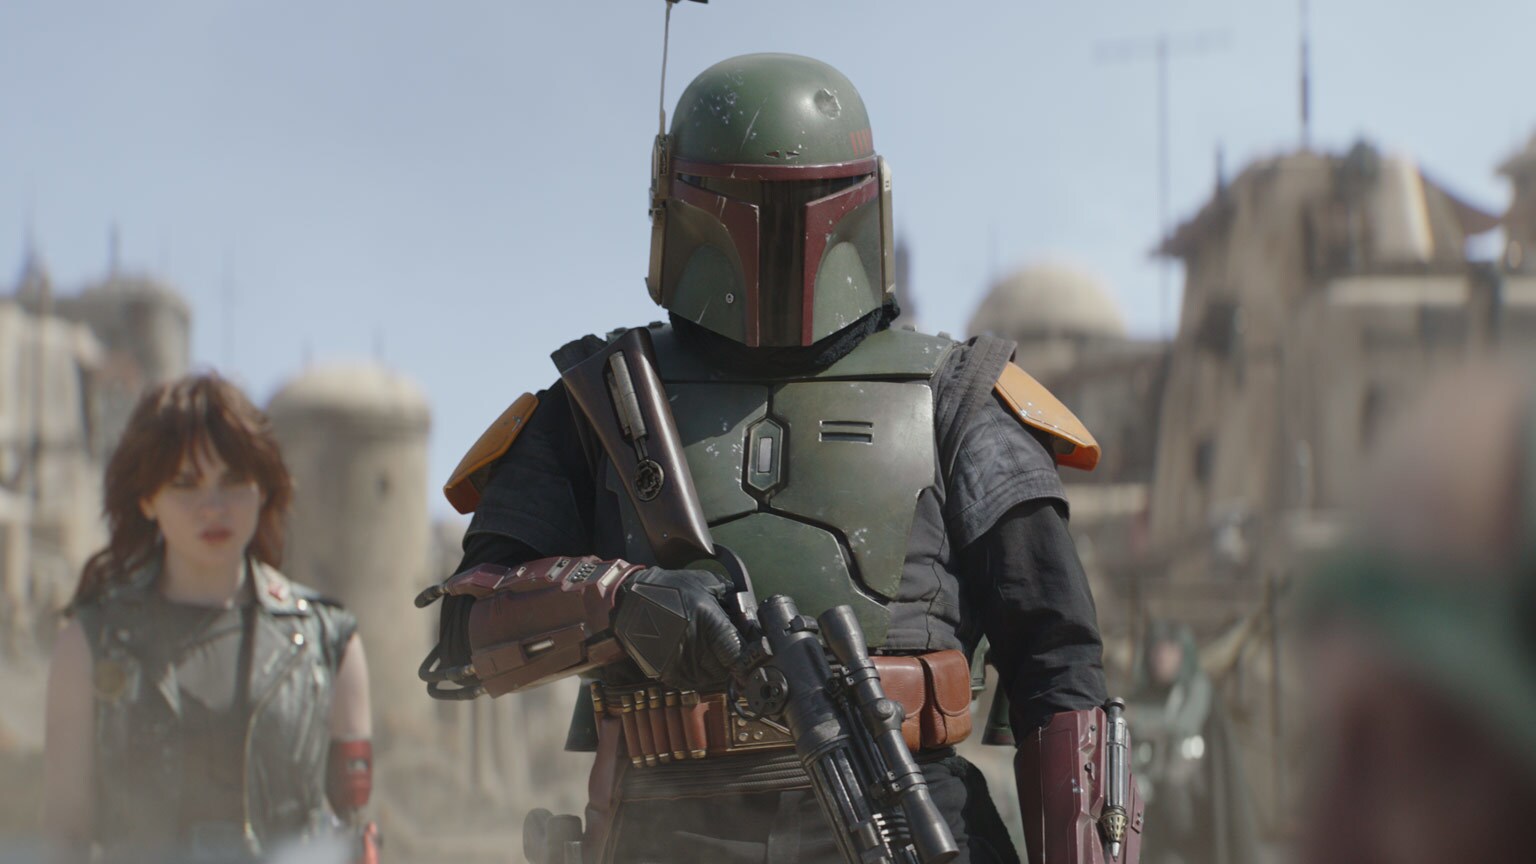 The Best of The Book of Boba Fett: 5 Highlights from “Chapter 3: The Streets of Mos Espa”